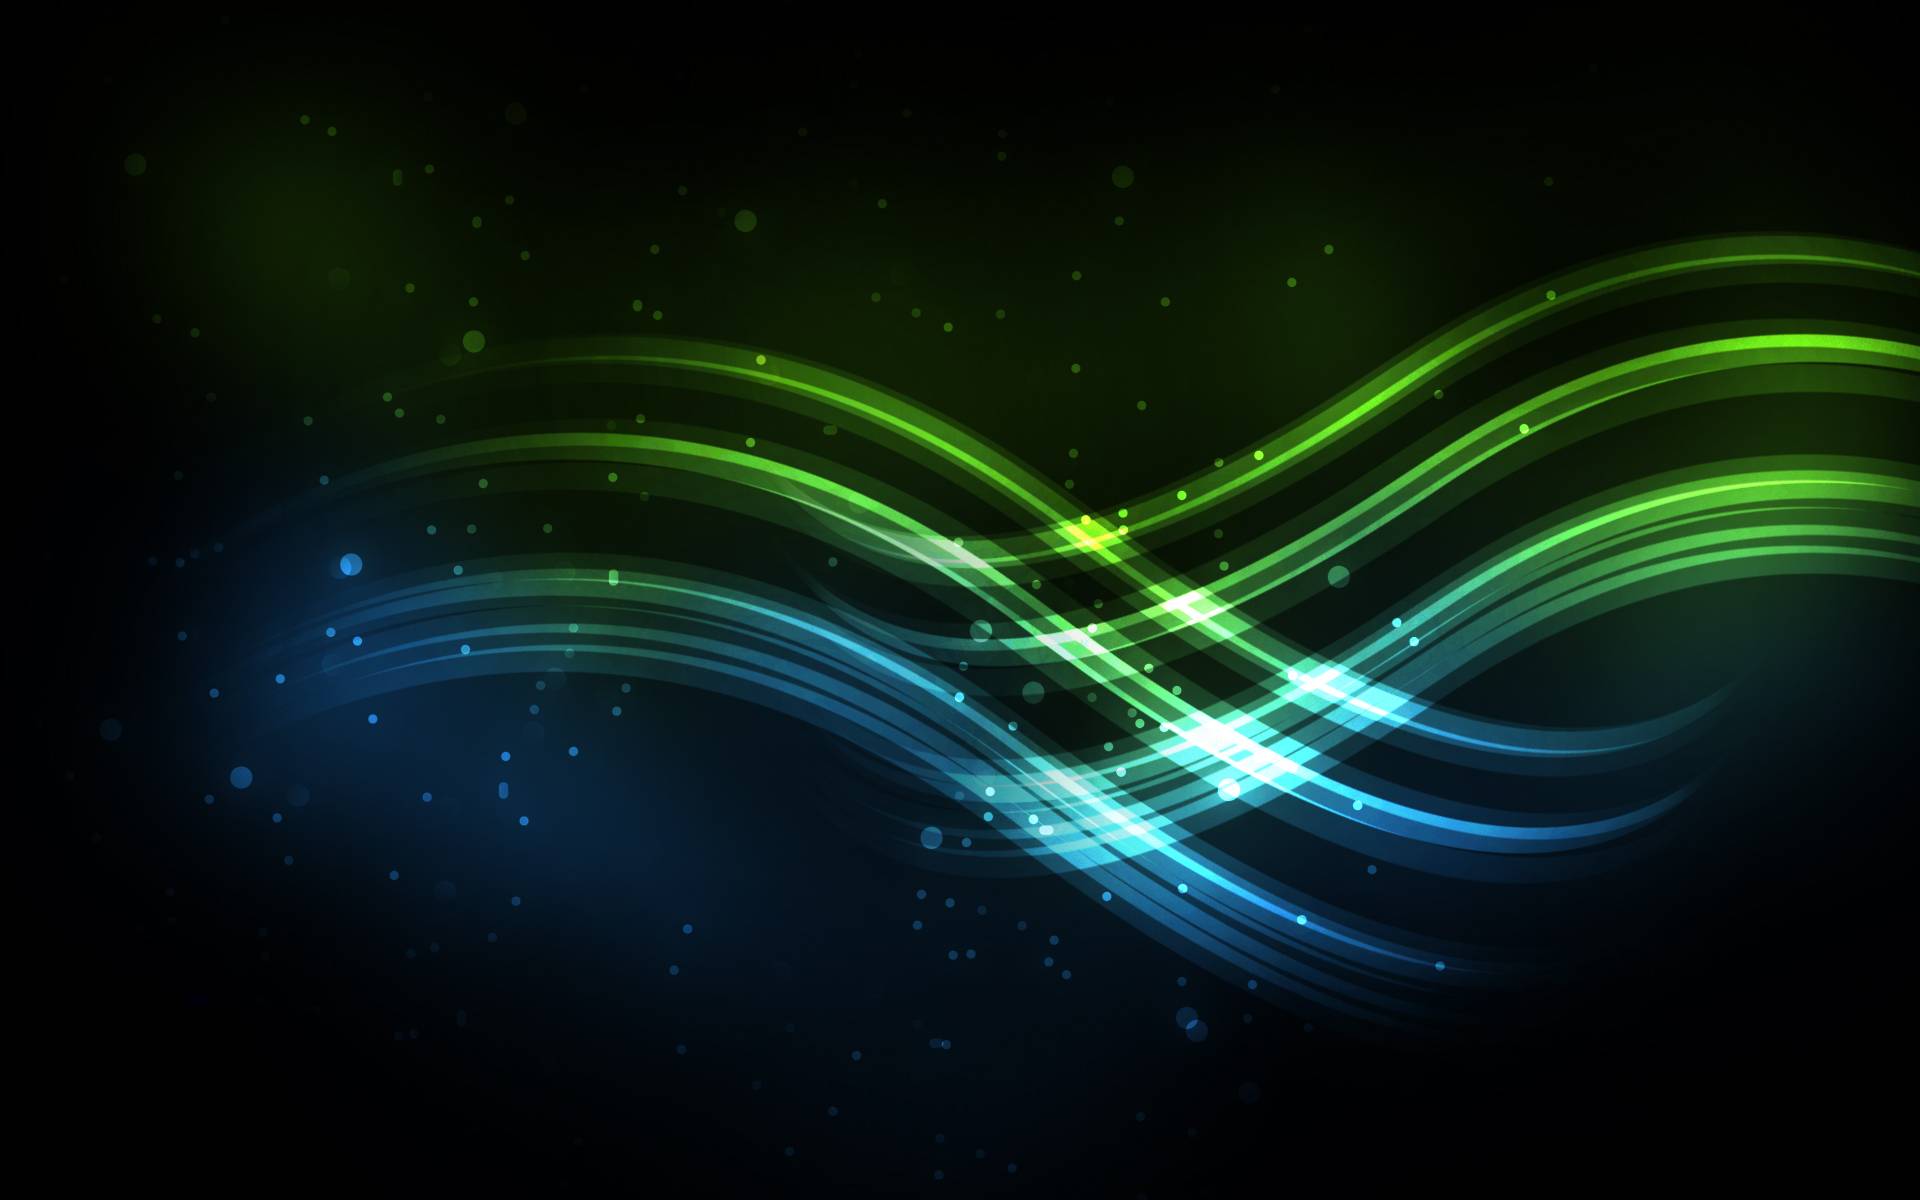 Nice Wallpaper, Px For Mobile And Desktop - Green And Blue Cool Backgrounds - HD Wallpaper 